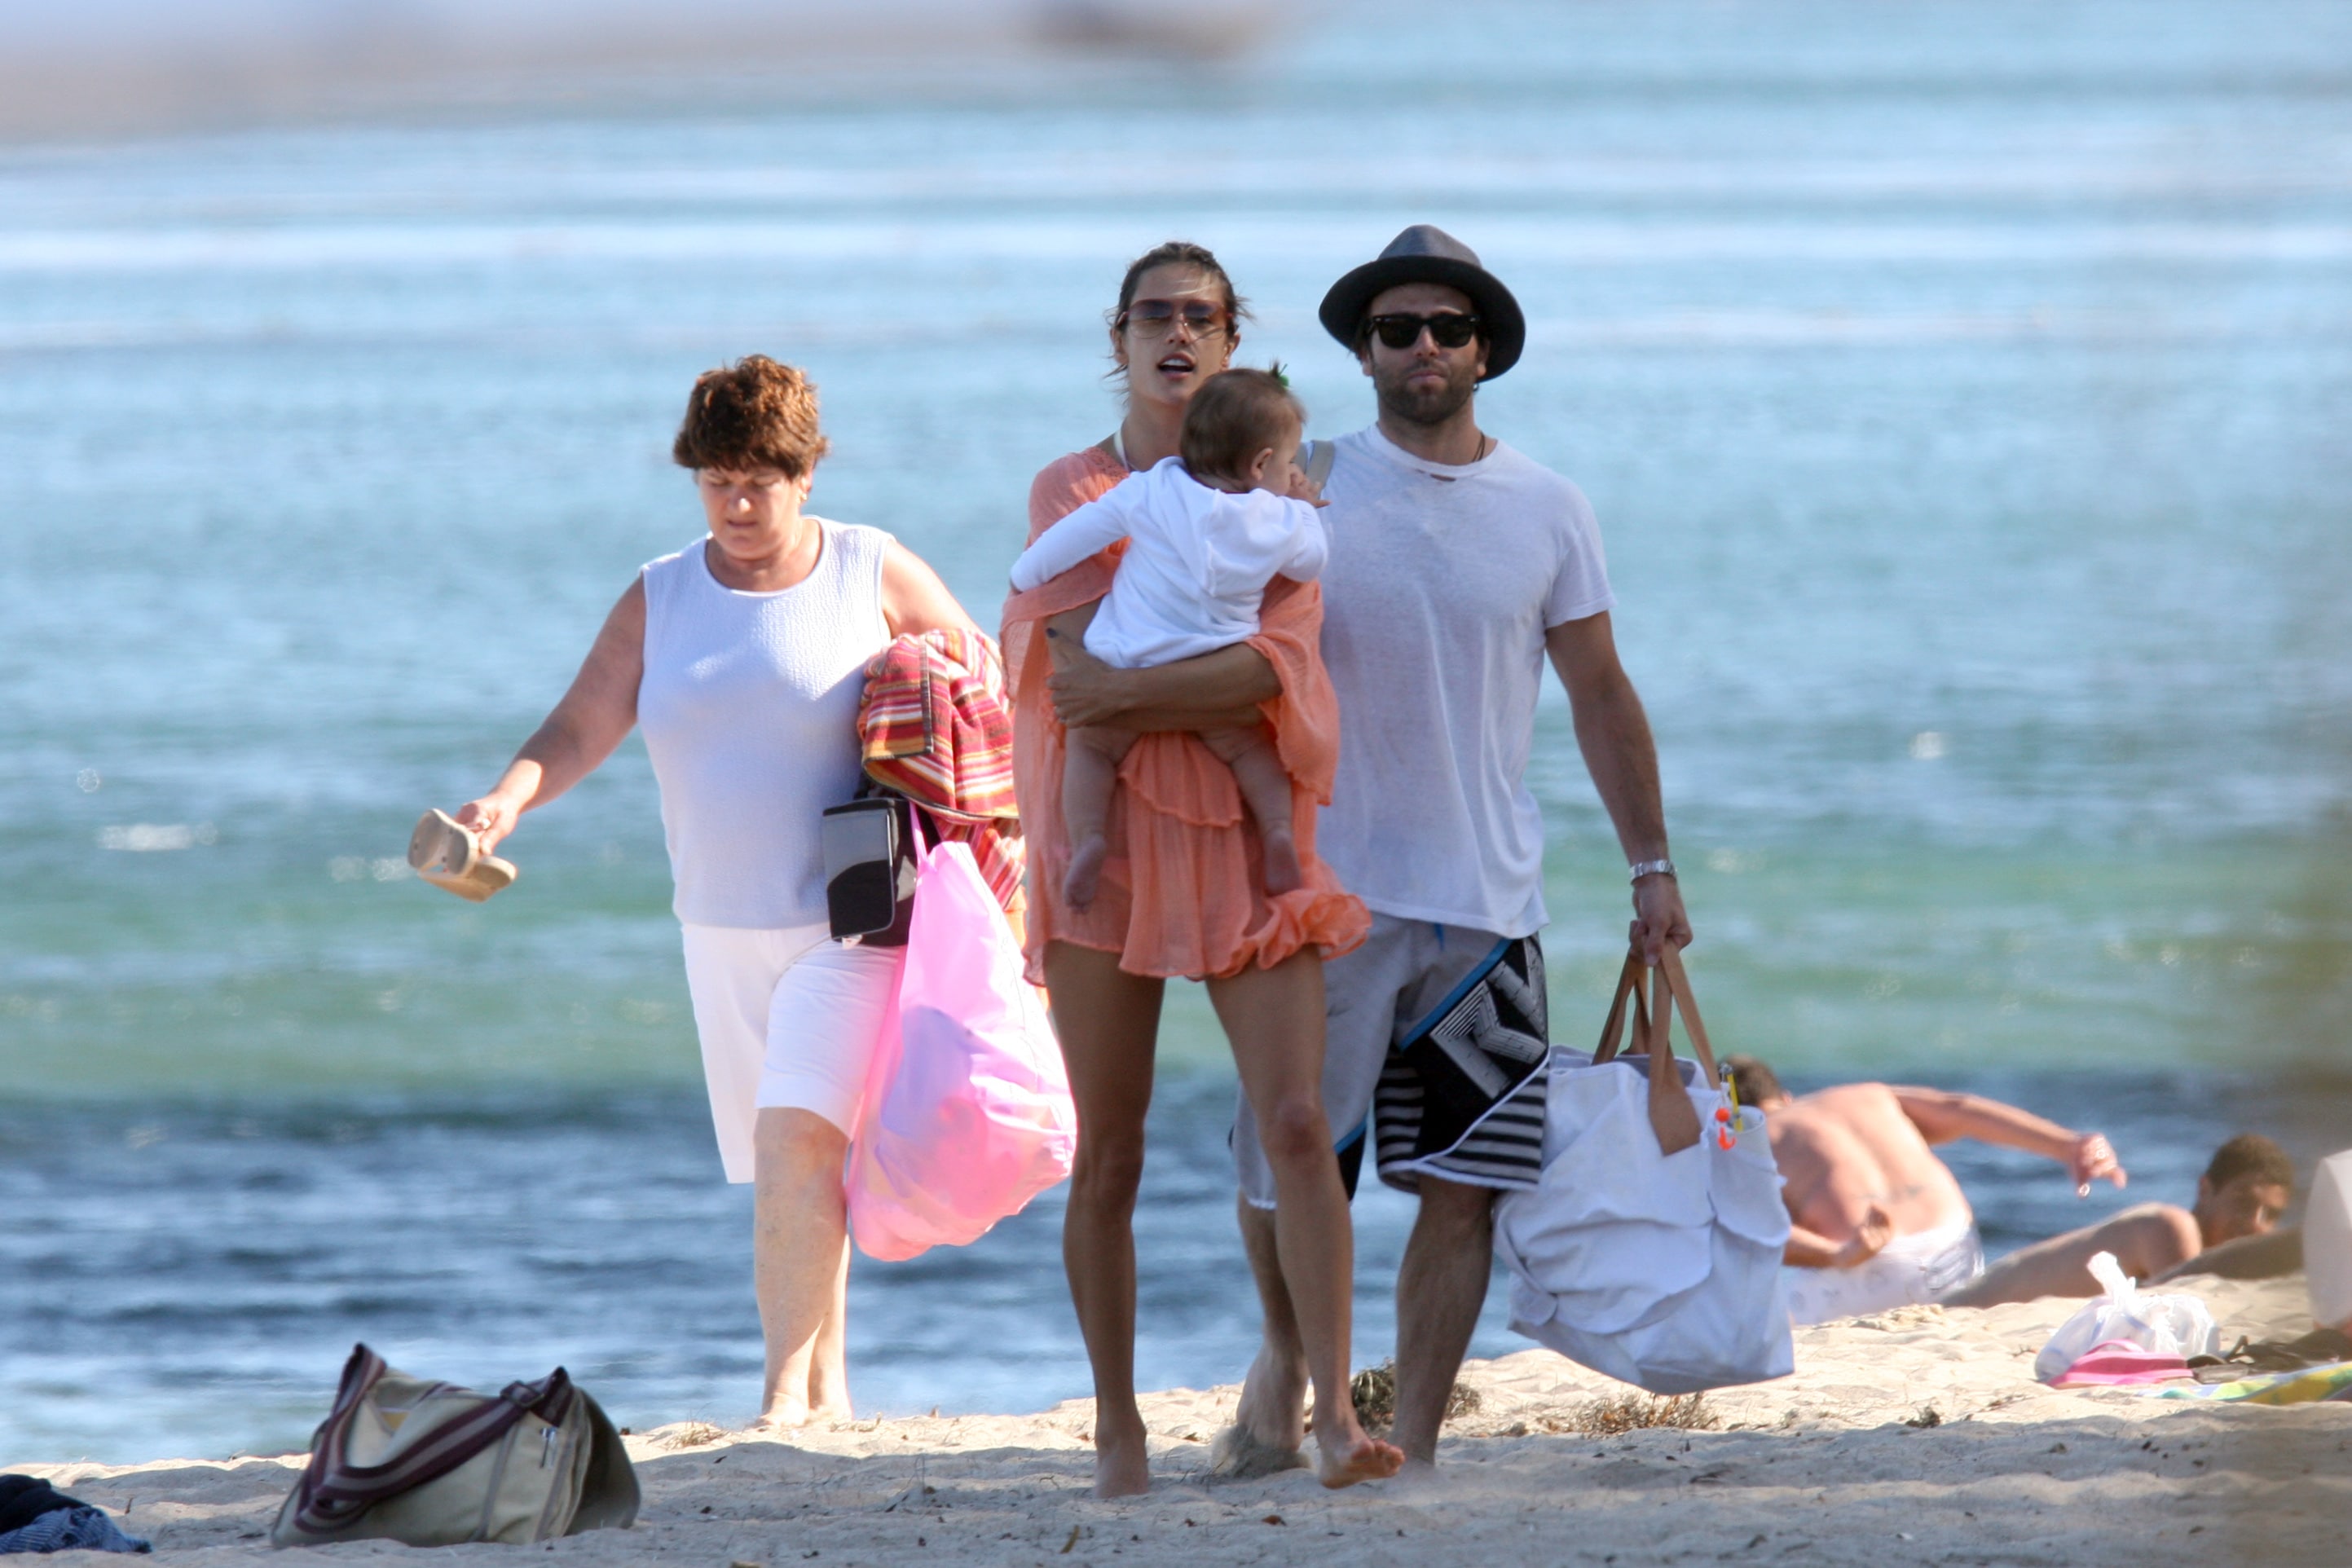 Alessandra and Her Family Hit The Beach In Malibu